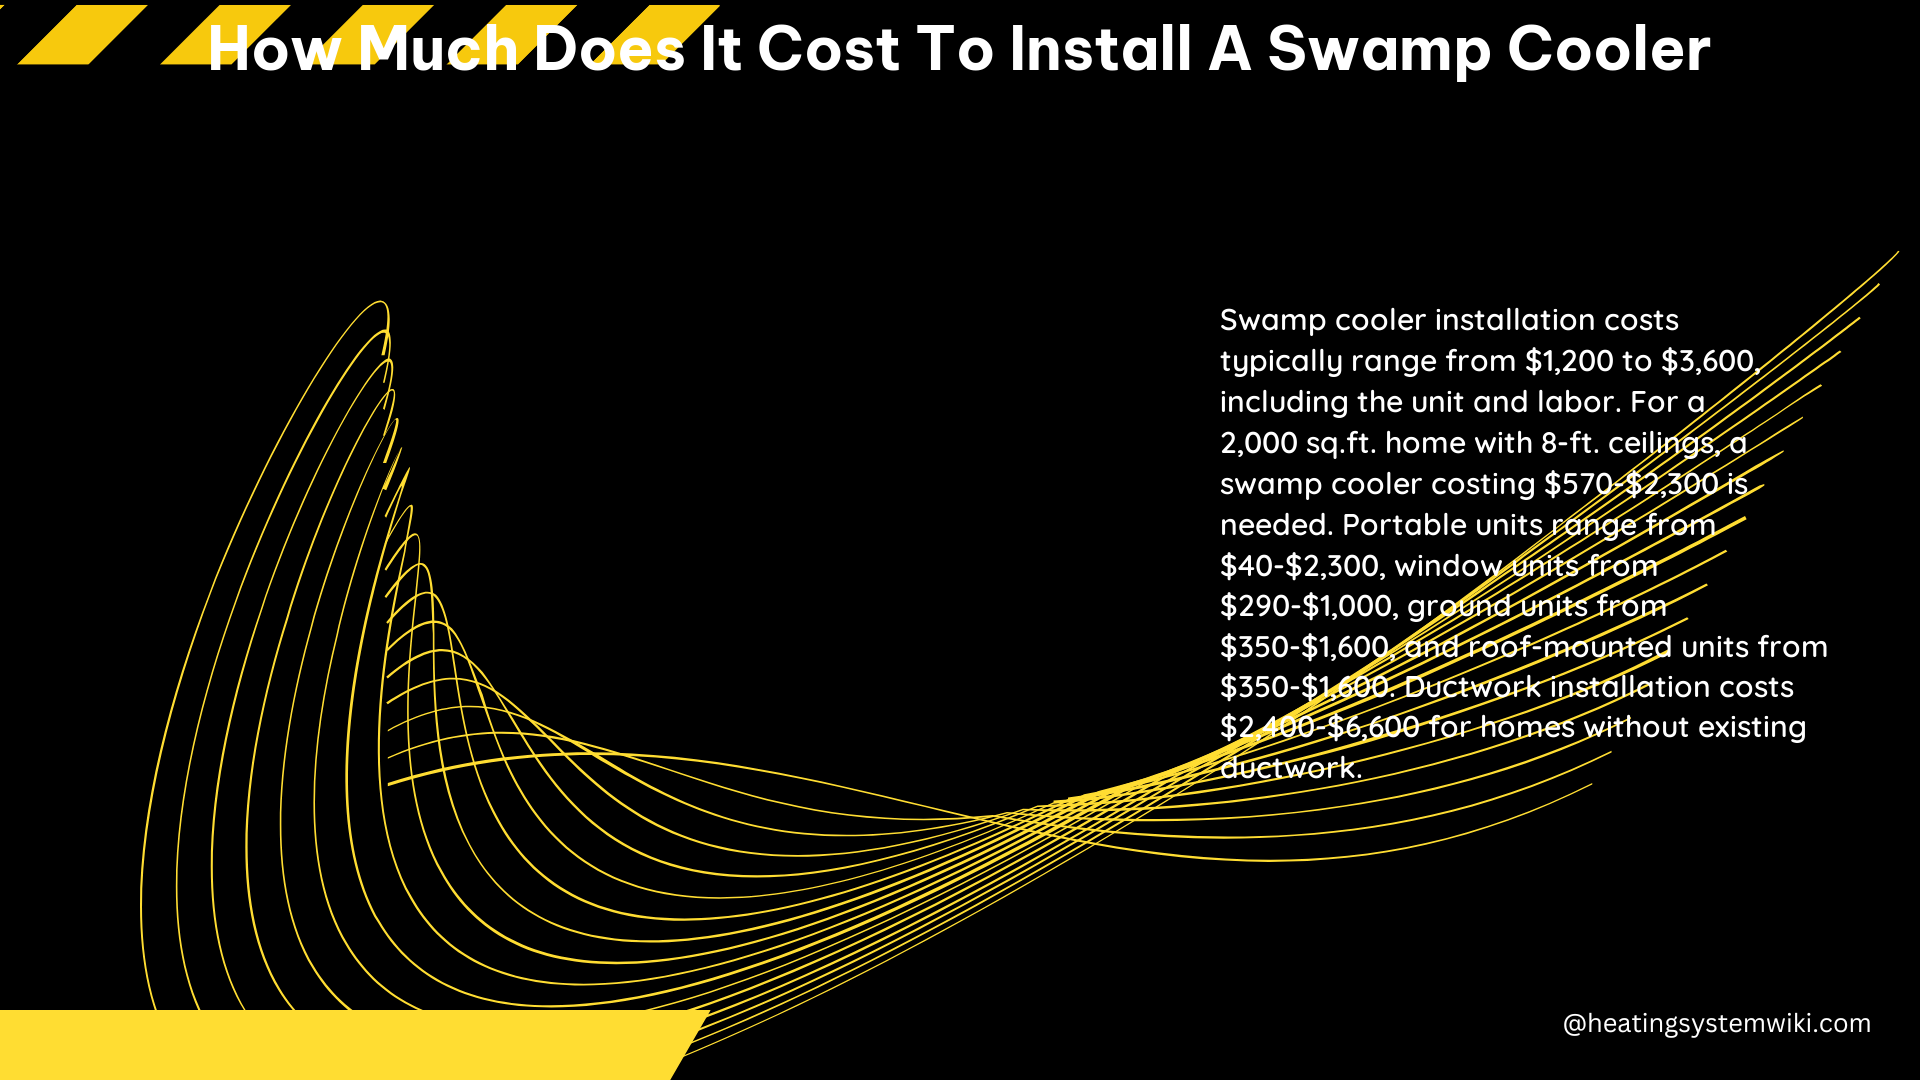 How Much Does It Cost to Install a Swamp Cooler